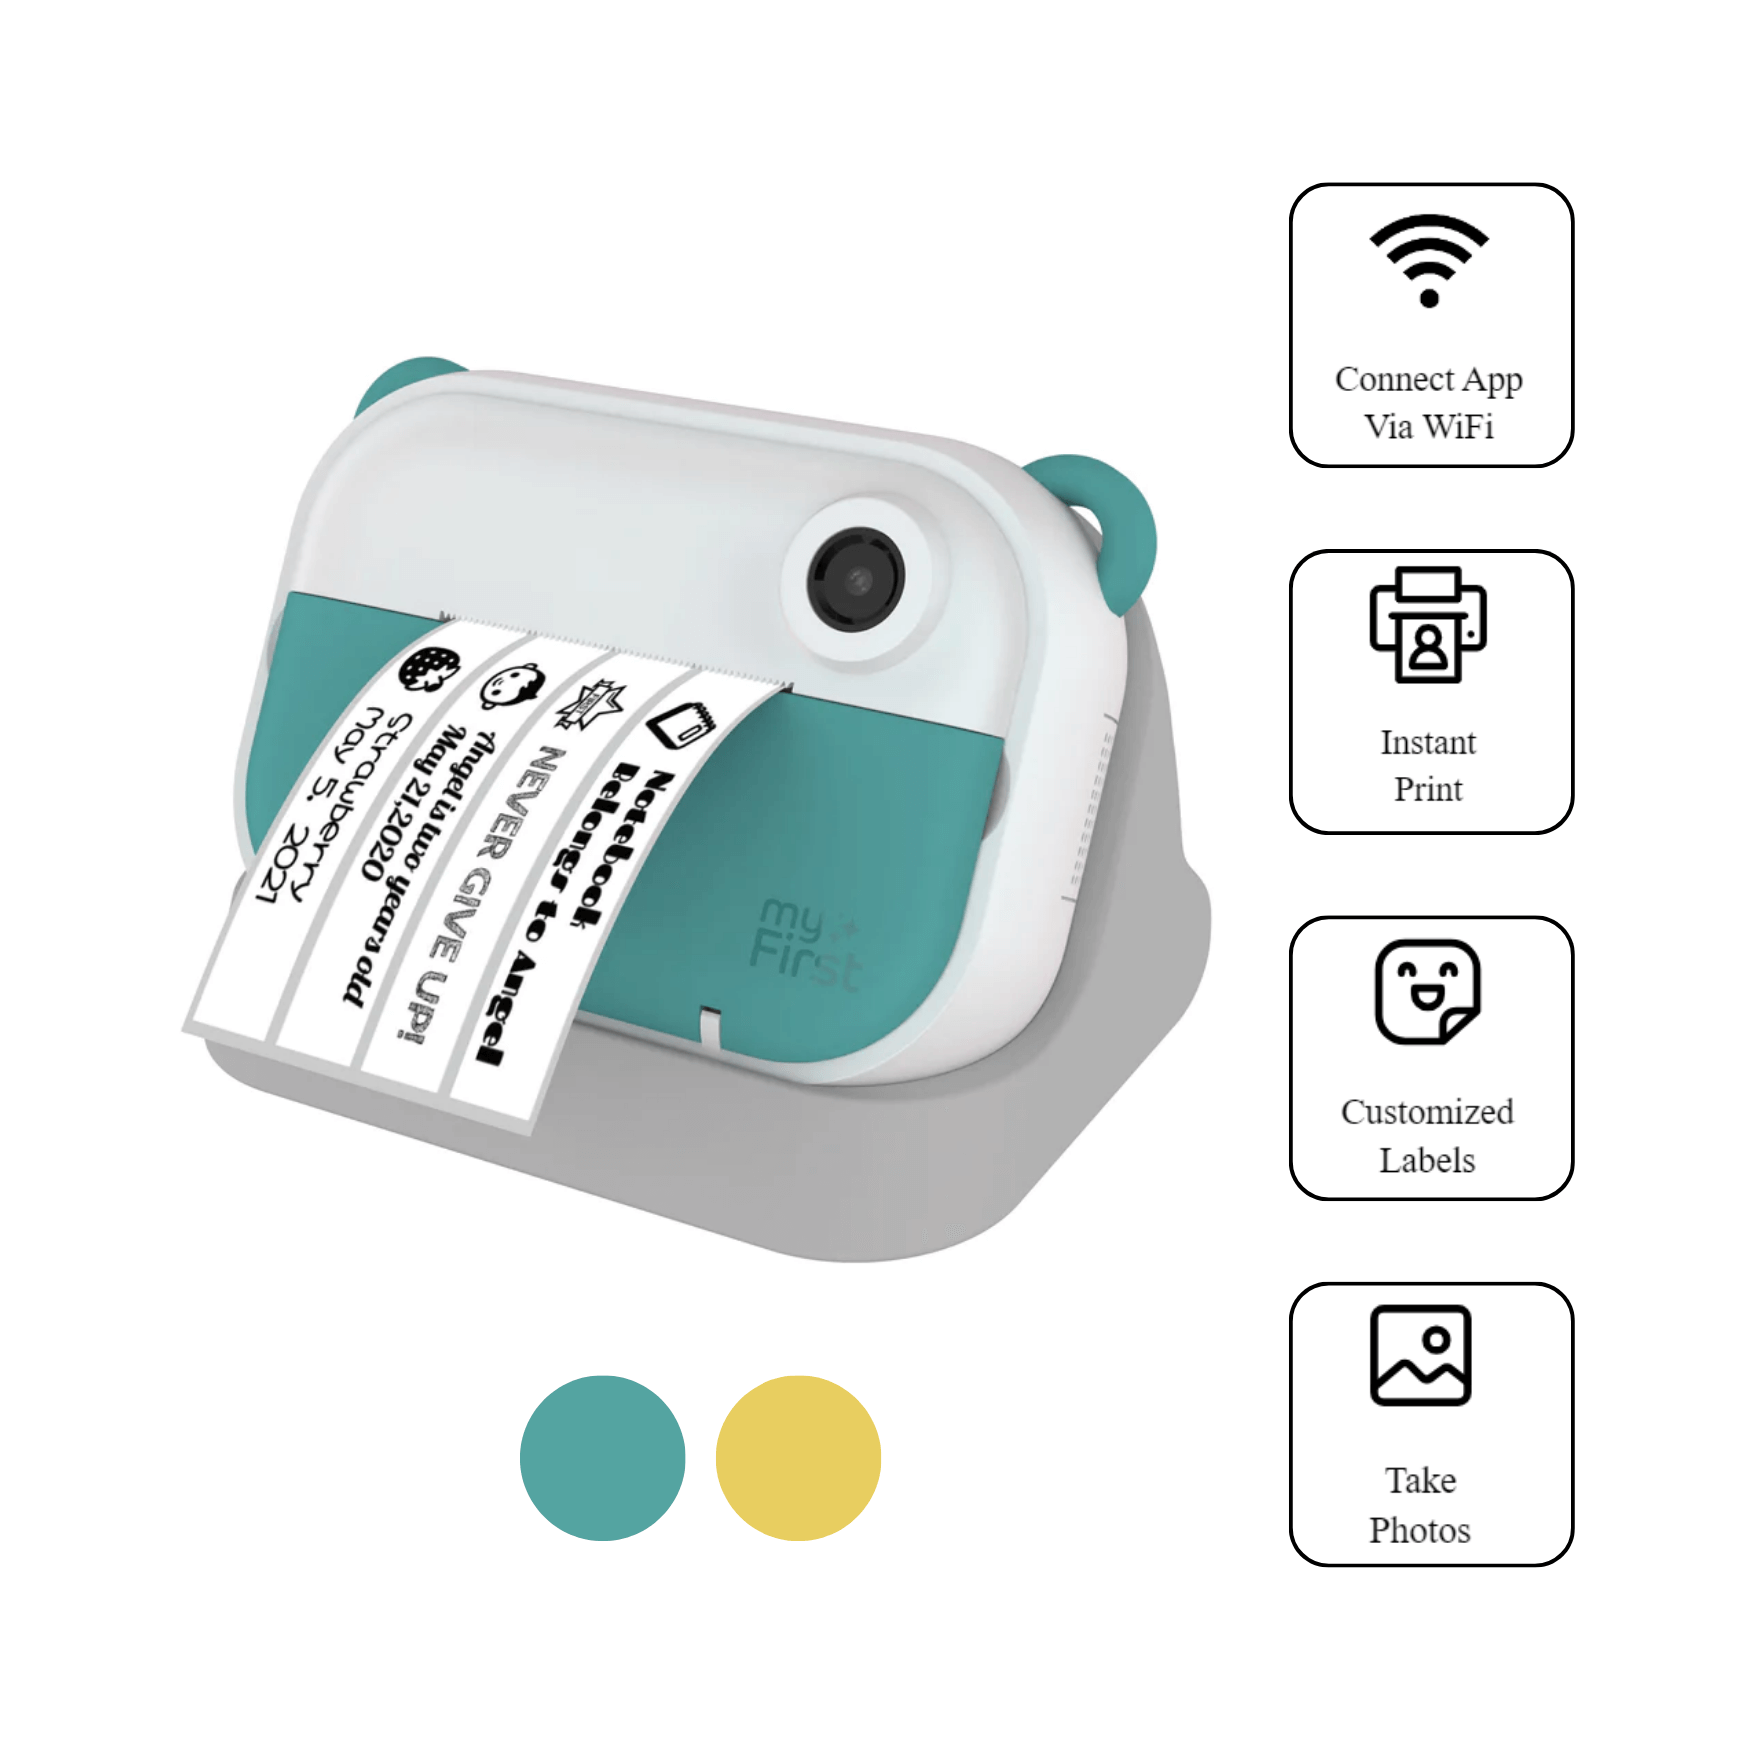 myFirst Camera Insta Wi Instant Print Camera for Kids with WiFi